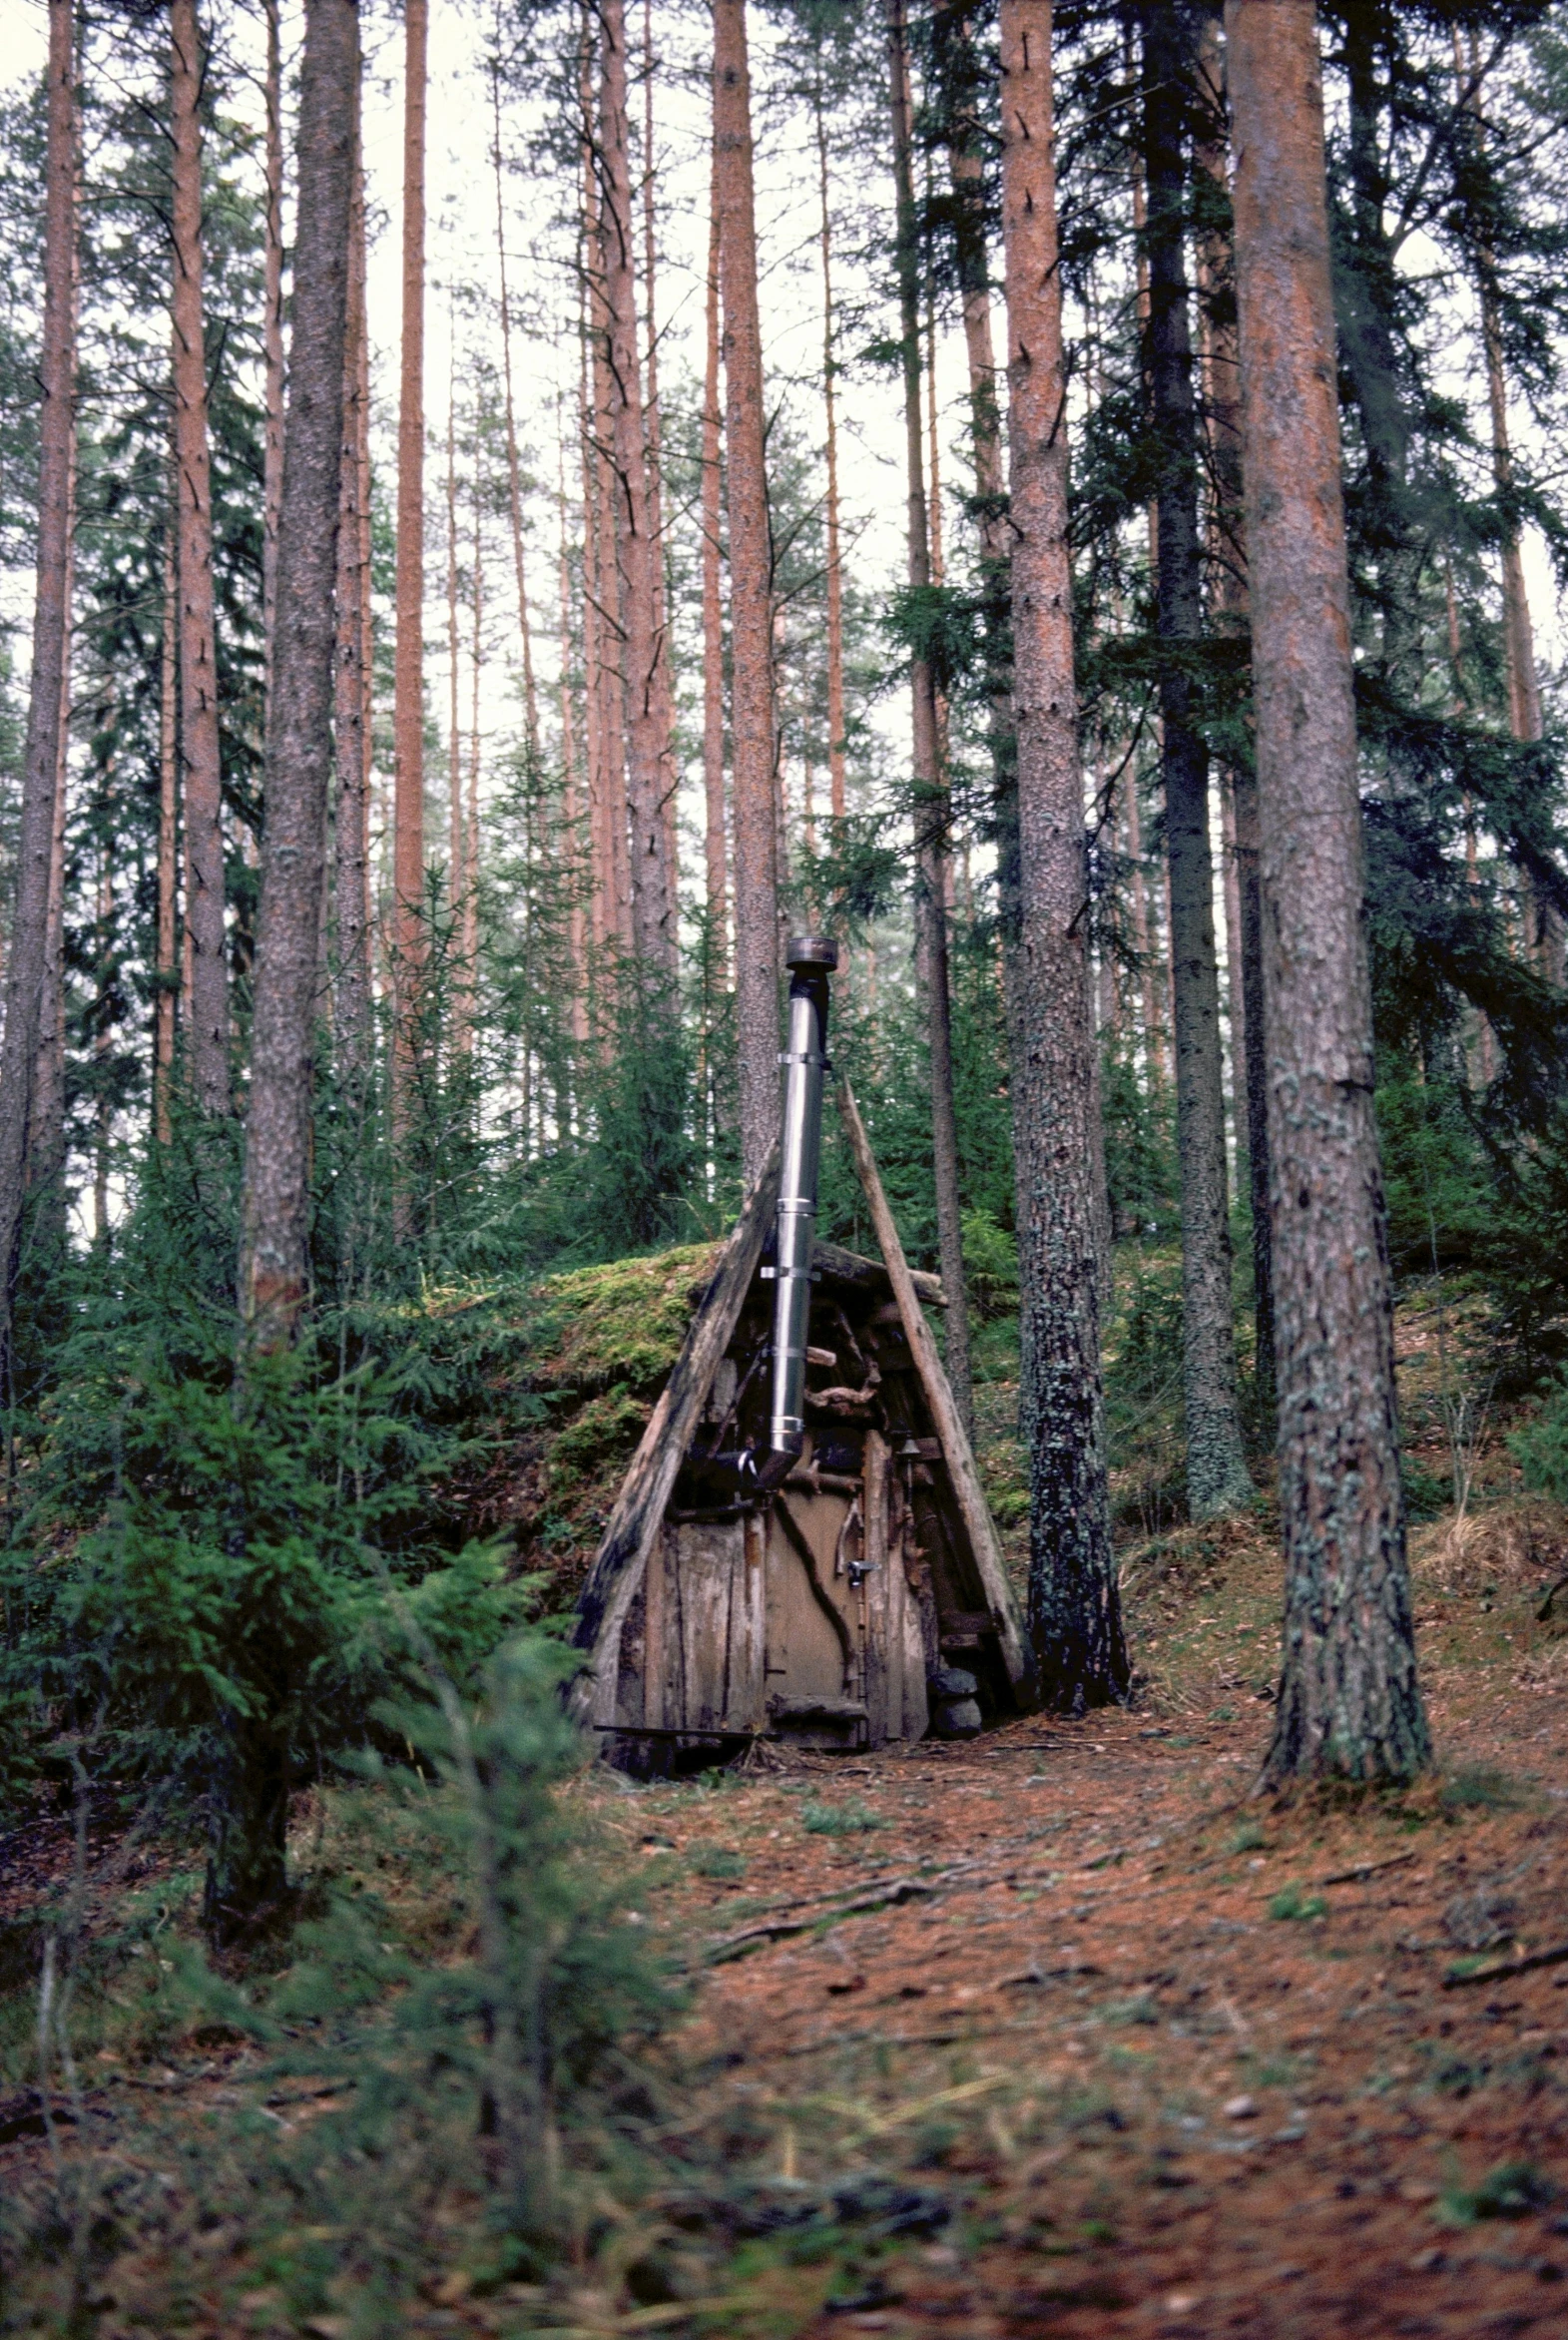 a small hut in the middle of a forest, by Marina Abramović, with axe, kalevala, ((forest)), dunce